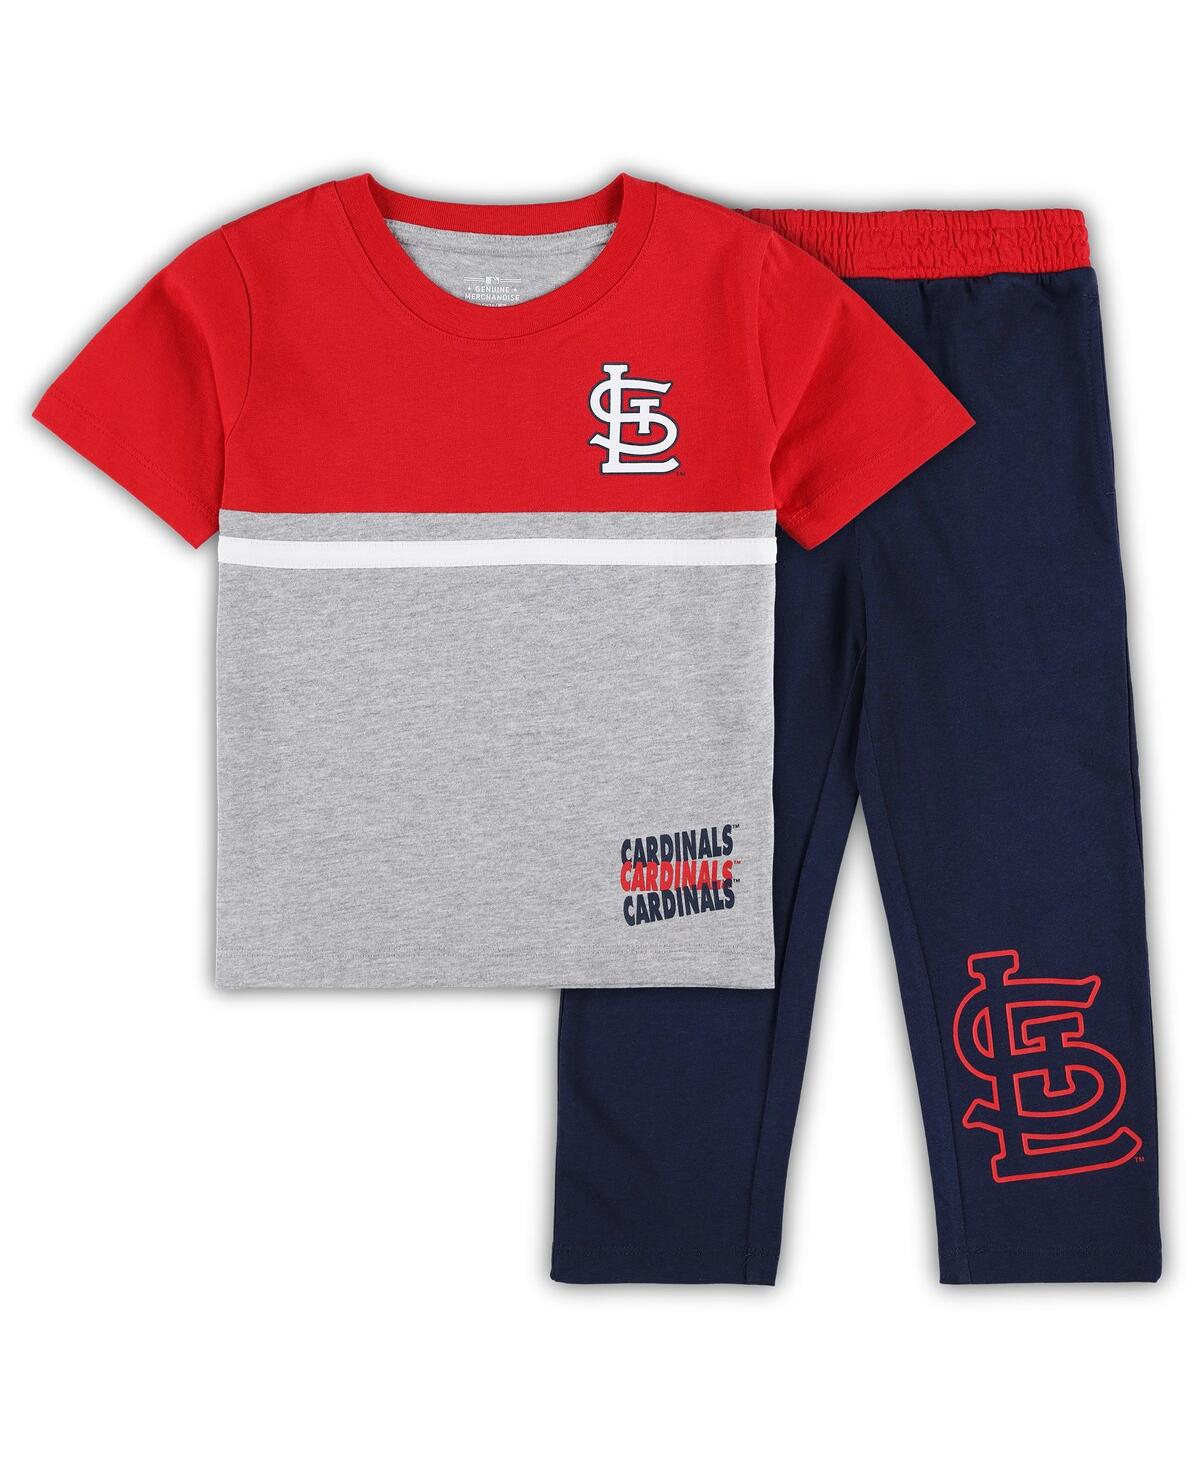 Outerstuff Babies' Toddler Boys And Girls Red, Navy St. Louis Cardinals Batters Box T-shirt And Pants Set In Red,navy